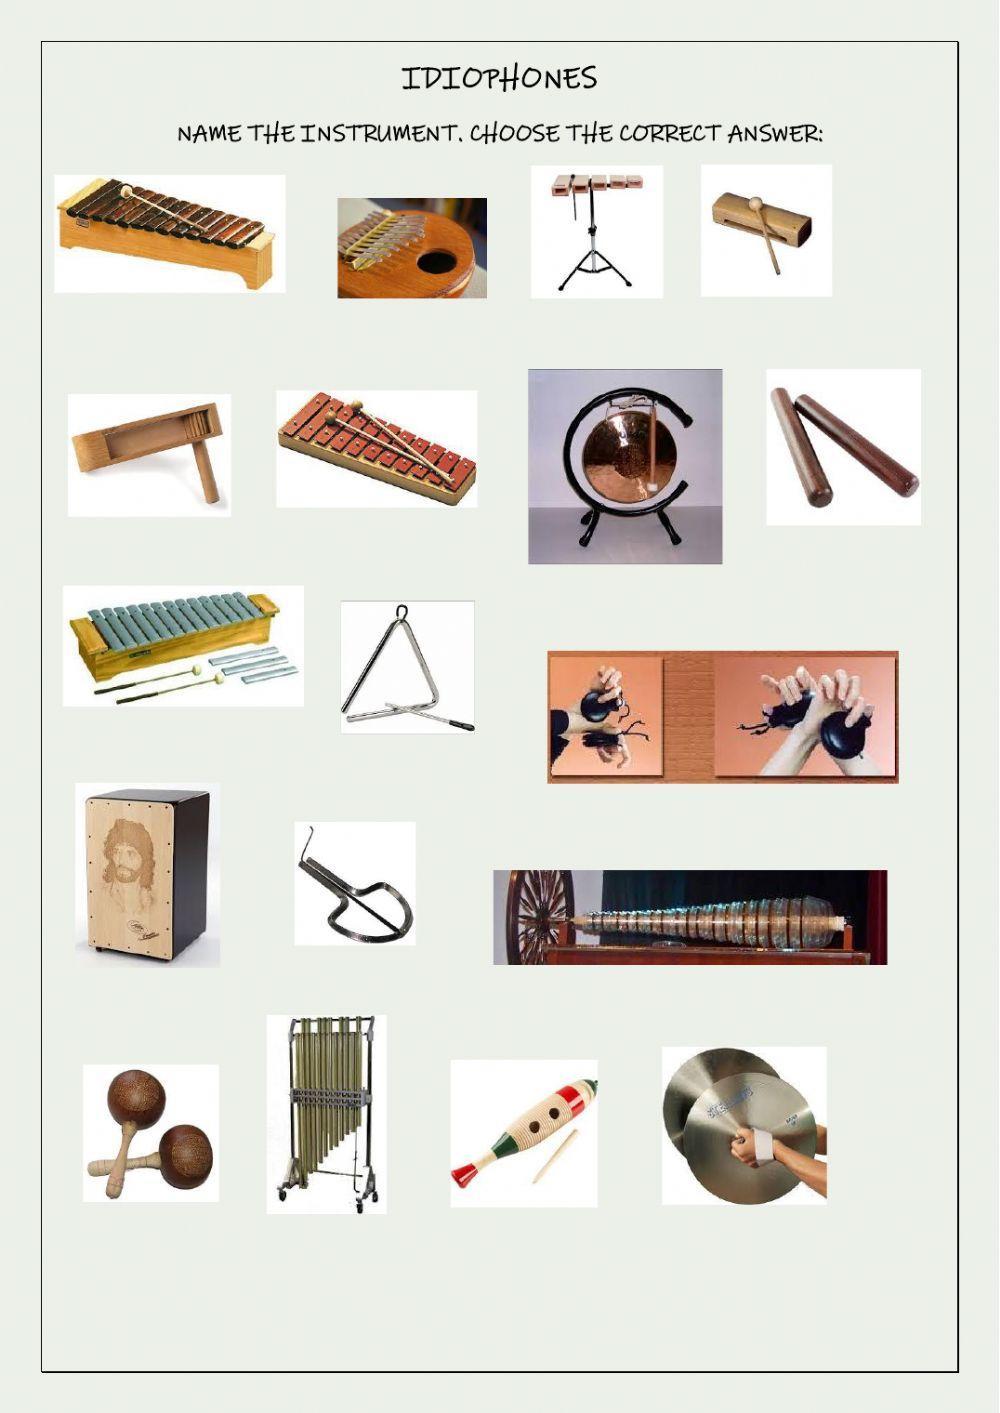 Name the instruments